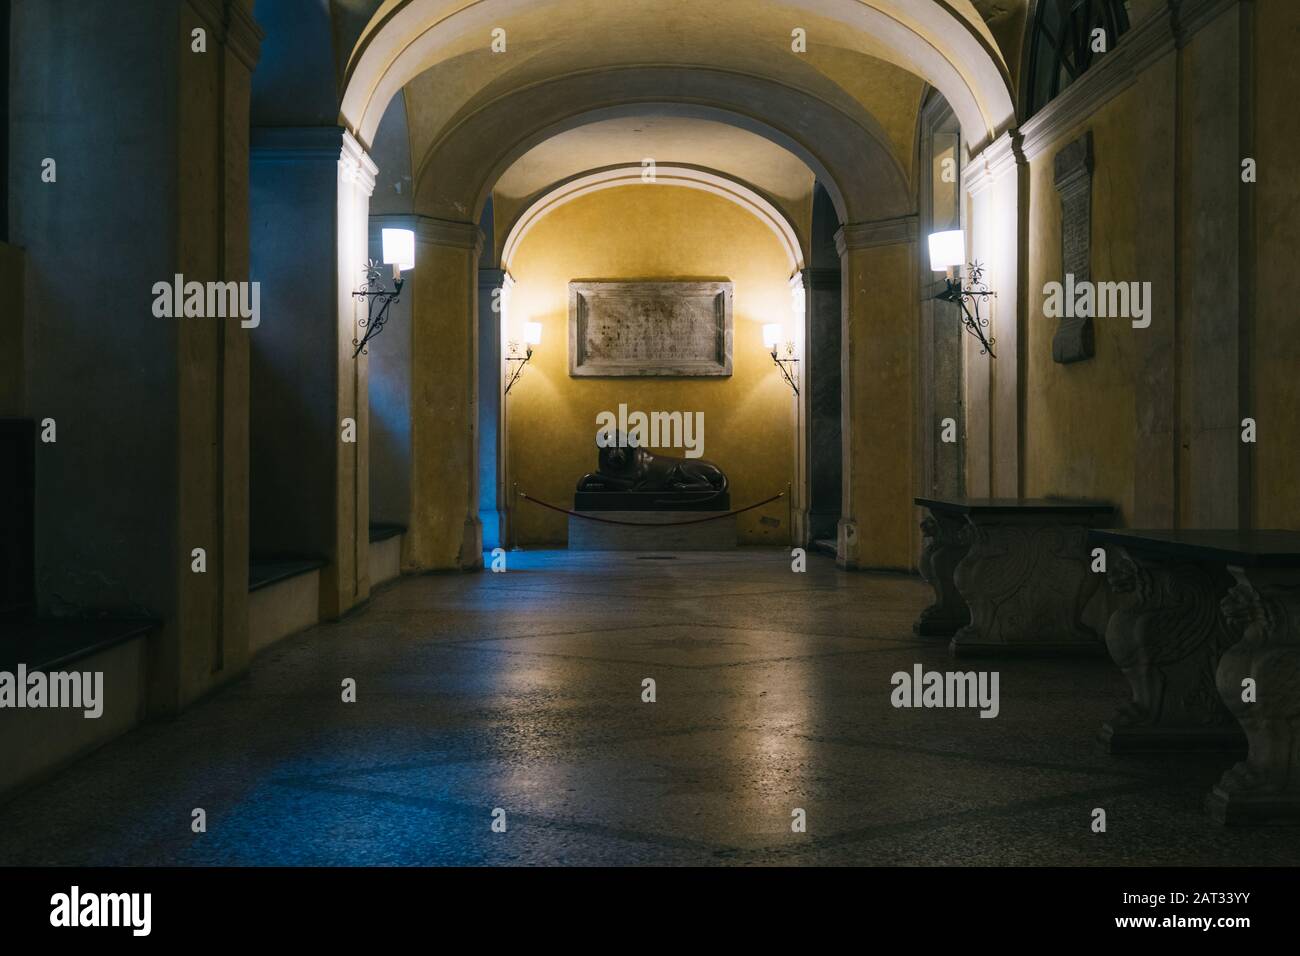 Rome, Italy - Dec 30, 2019: An old courtyard in the via delle quattro fontane, Rome Italy Stock Photo